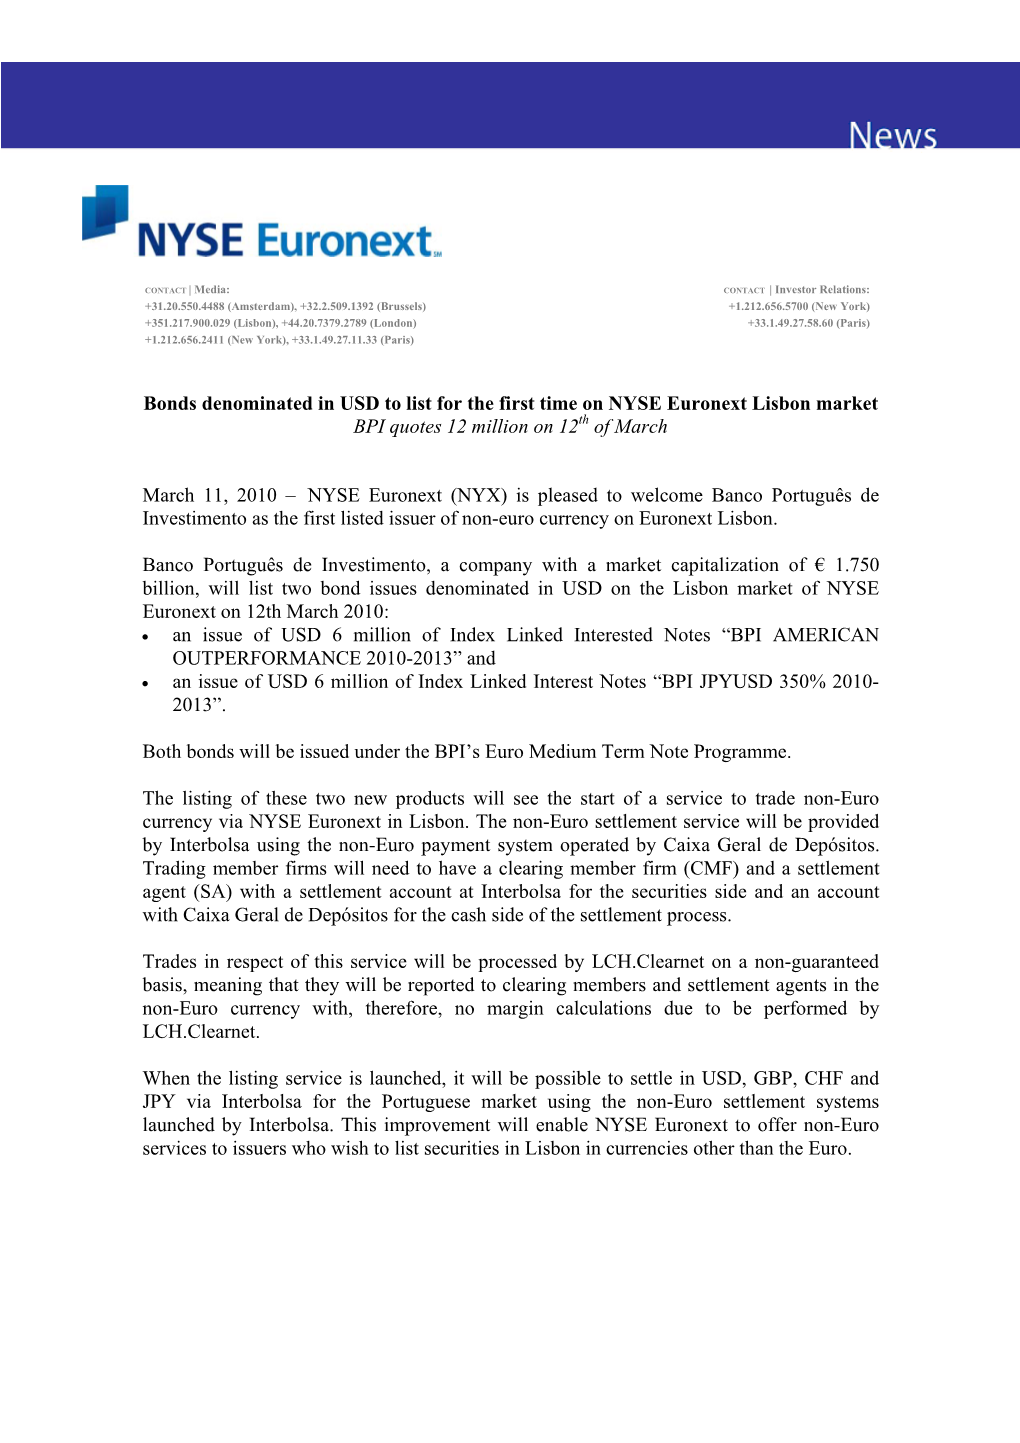 Bonds Denominated in USD to List for the First Time on NYSE Euronext Lisbon Market BPI Quotes 12 Million on 12Th of March